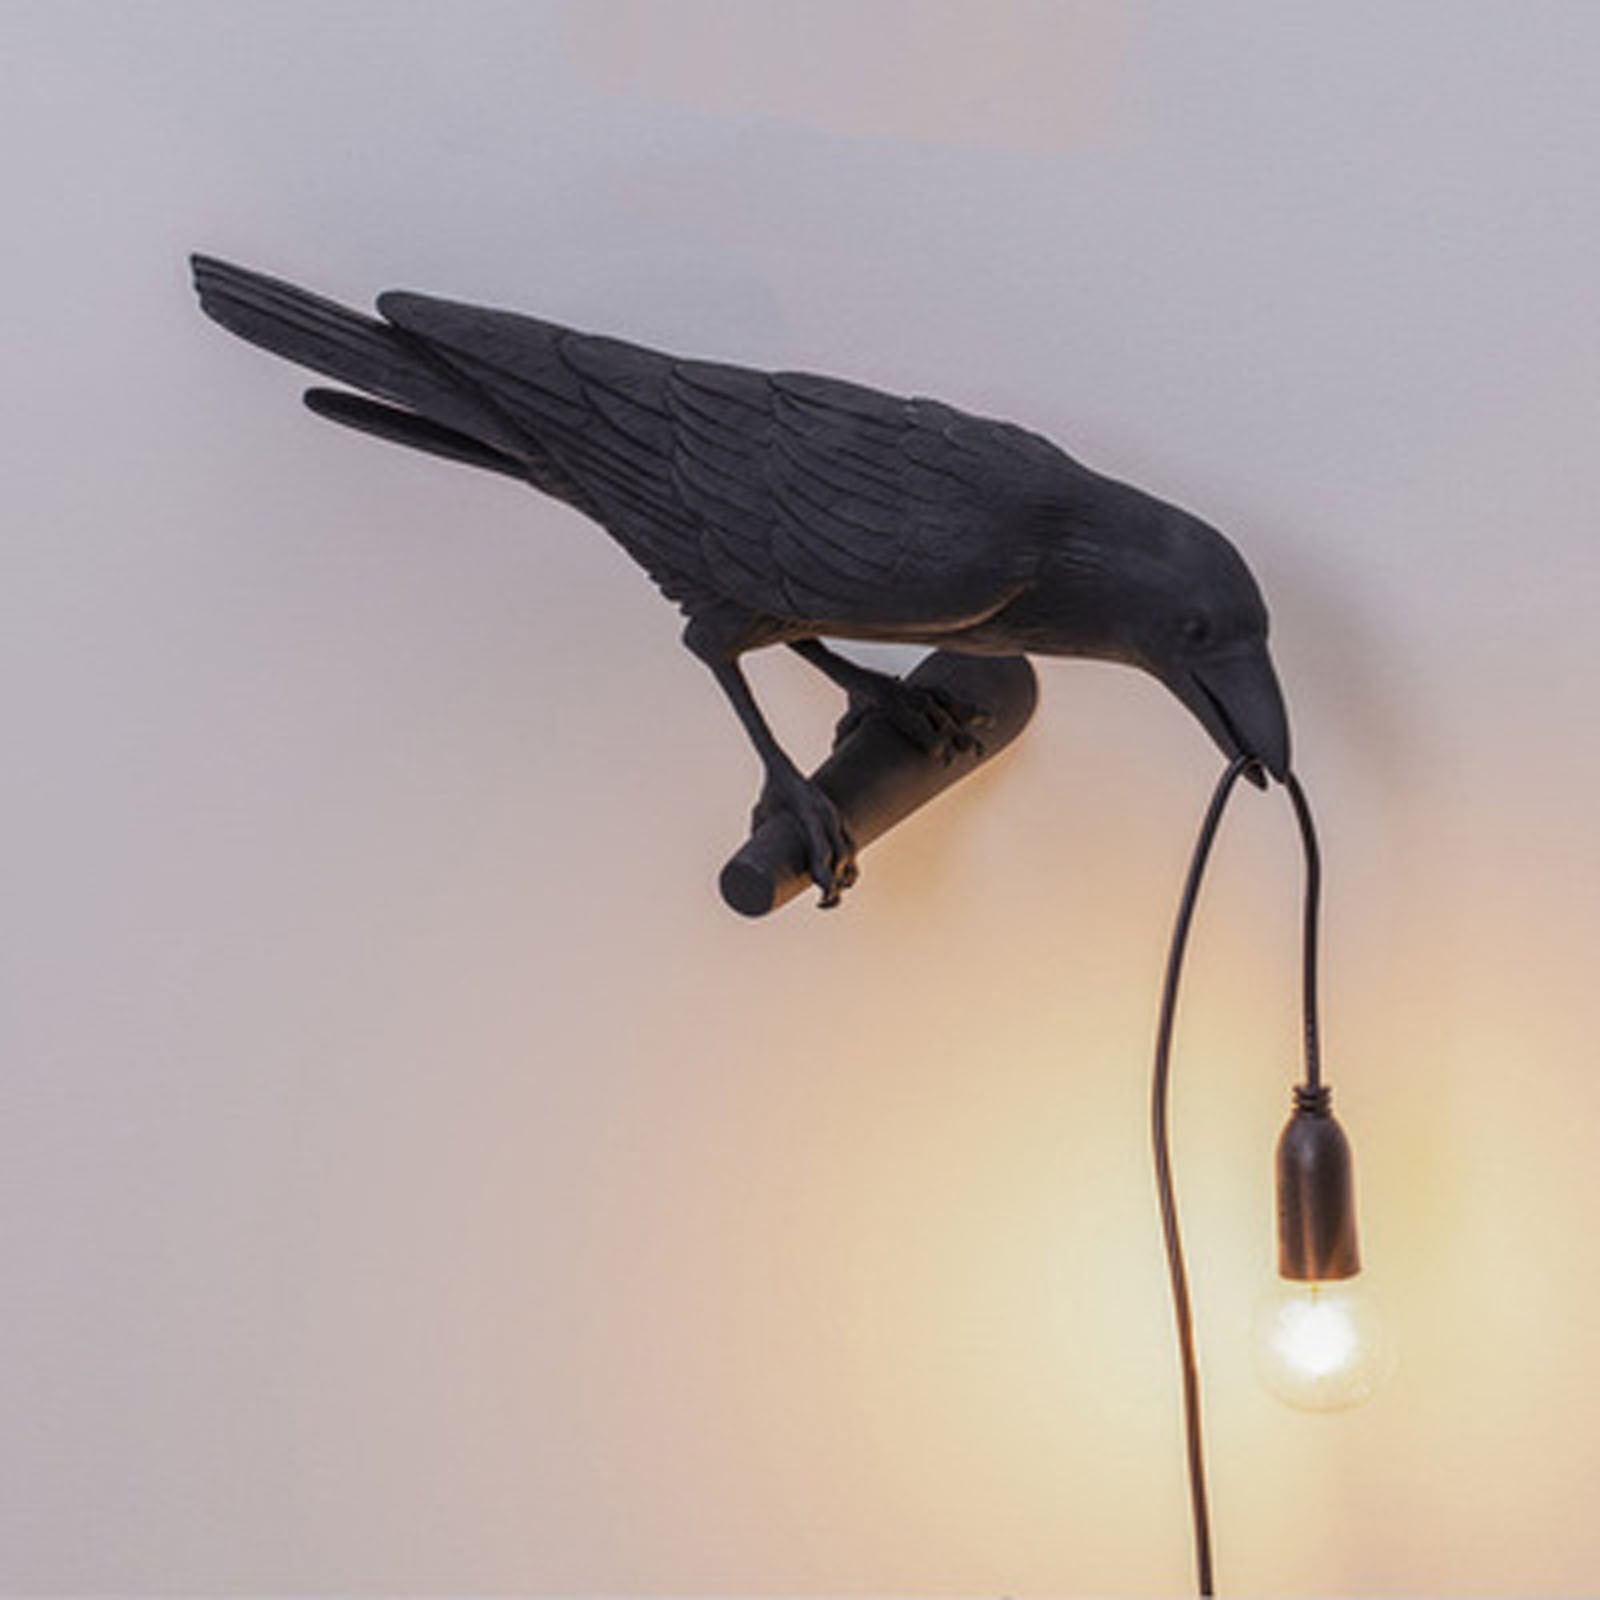 Raven Bird Lamp Crow Desk and Wall Plug-In Light Lamp House and Events Decor New 